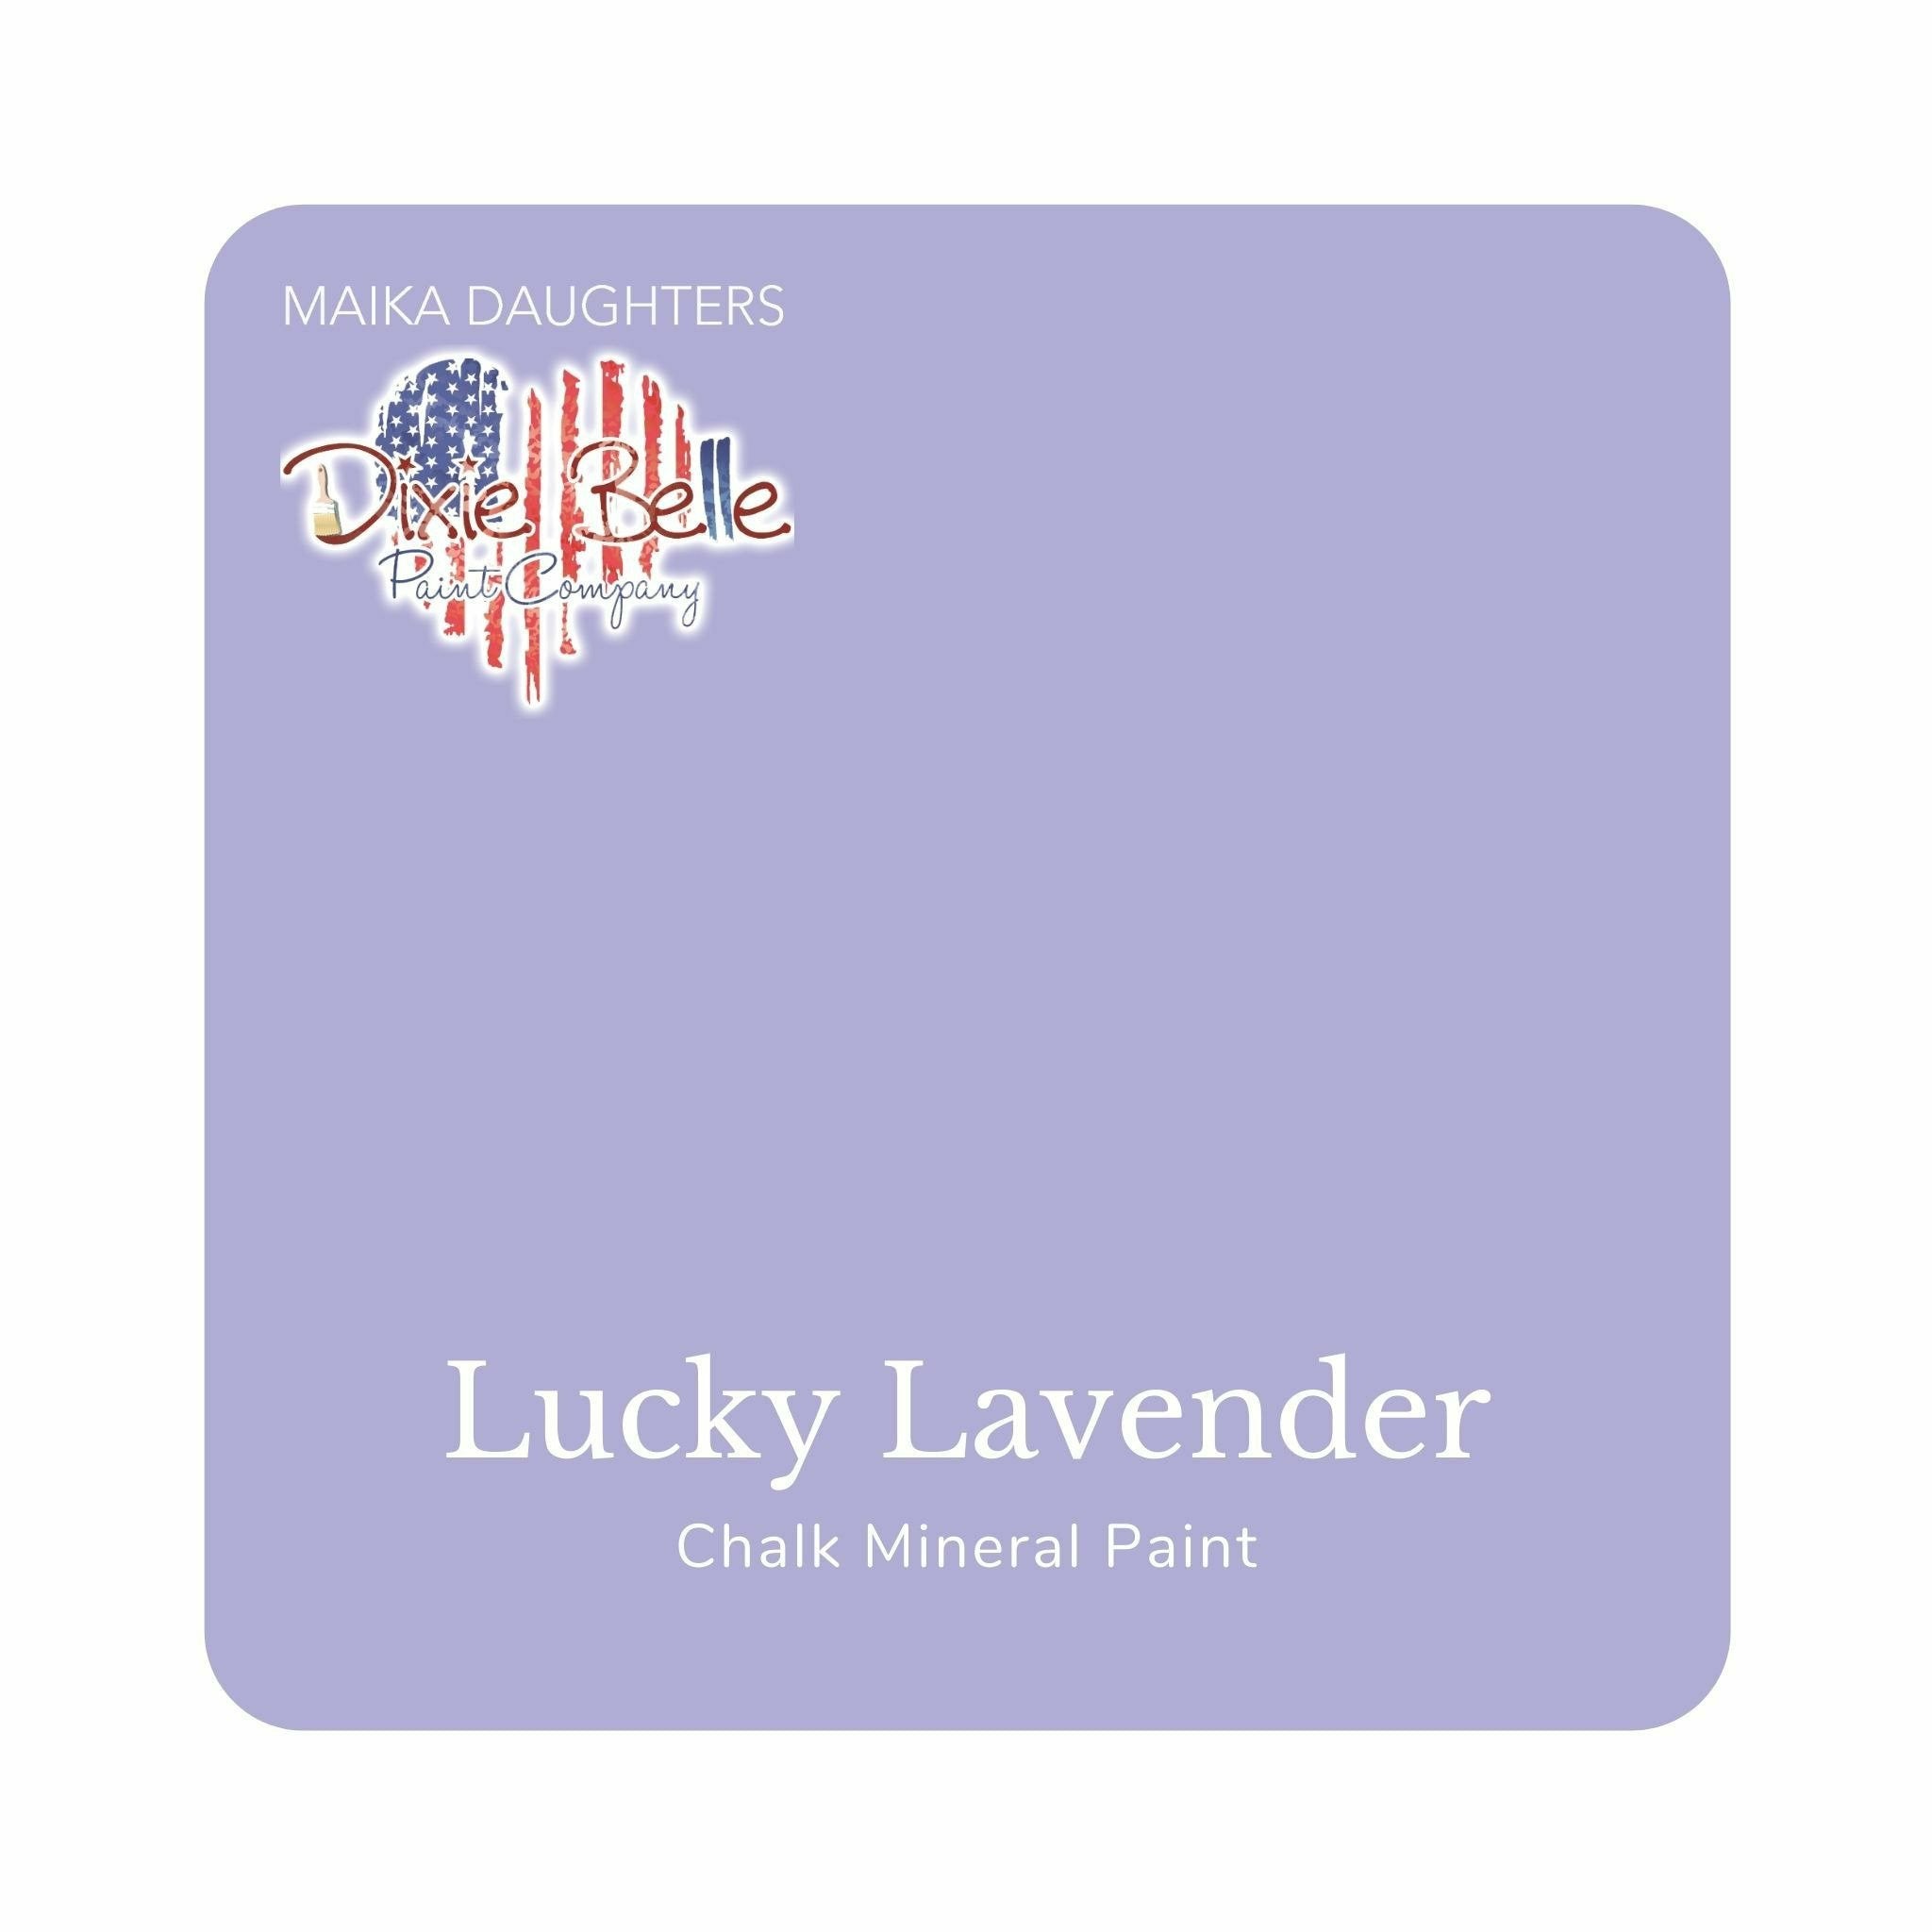 A square swatch card of Dixie Belle Paint Company’s Lucky Lavender Chalk Mineral Paint is against a white background. This color is a warm violet.